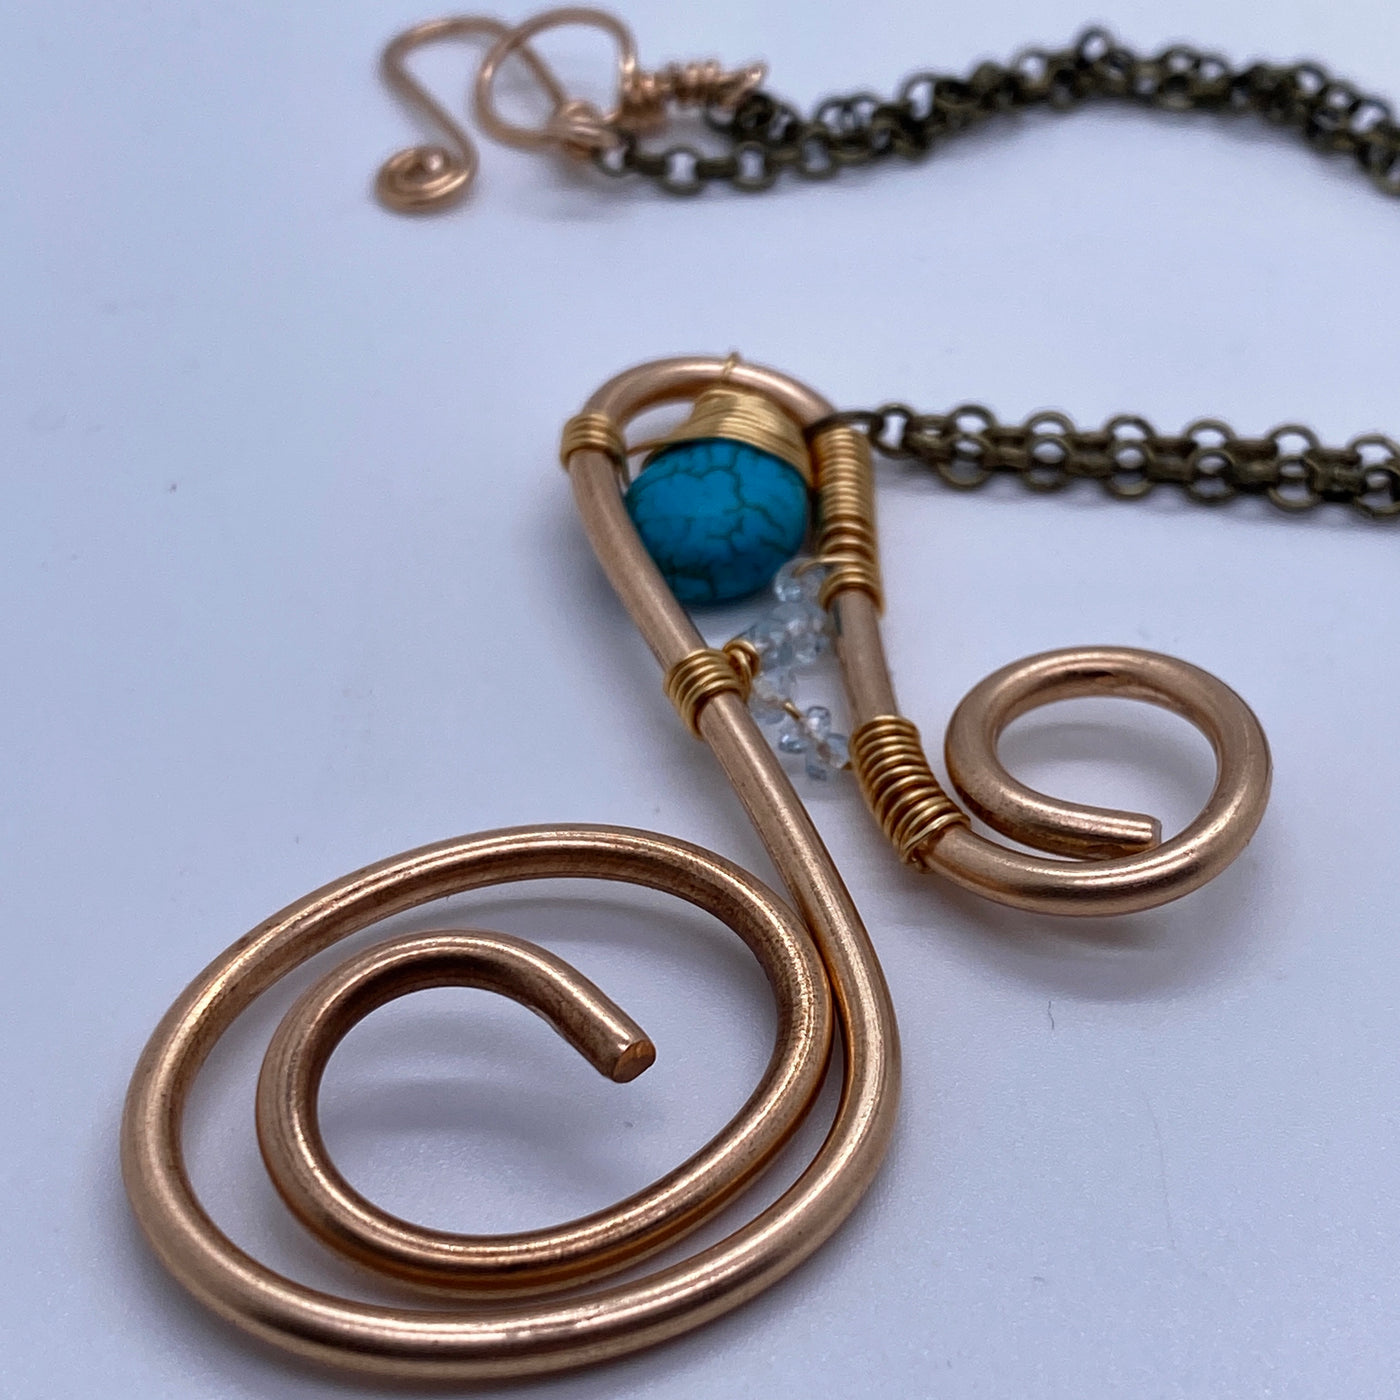 Large bronze wire and turquoise pendant